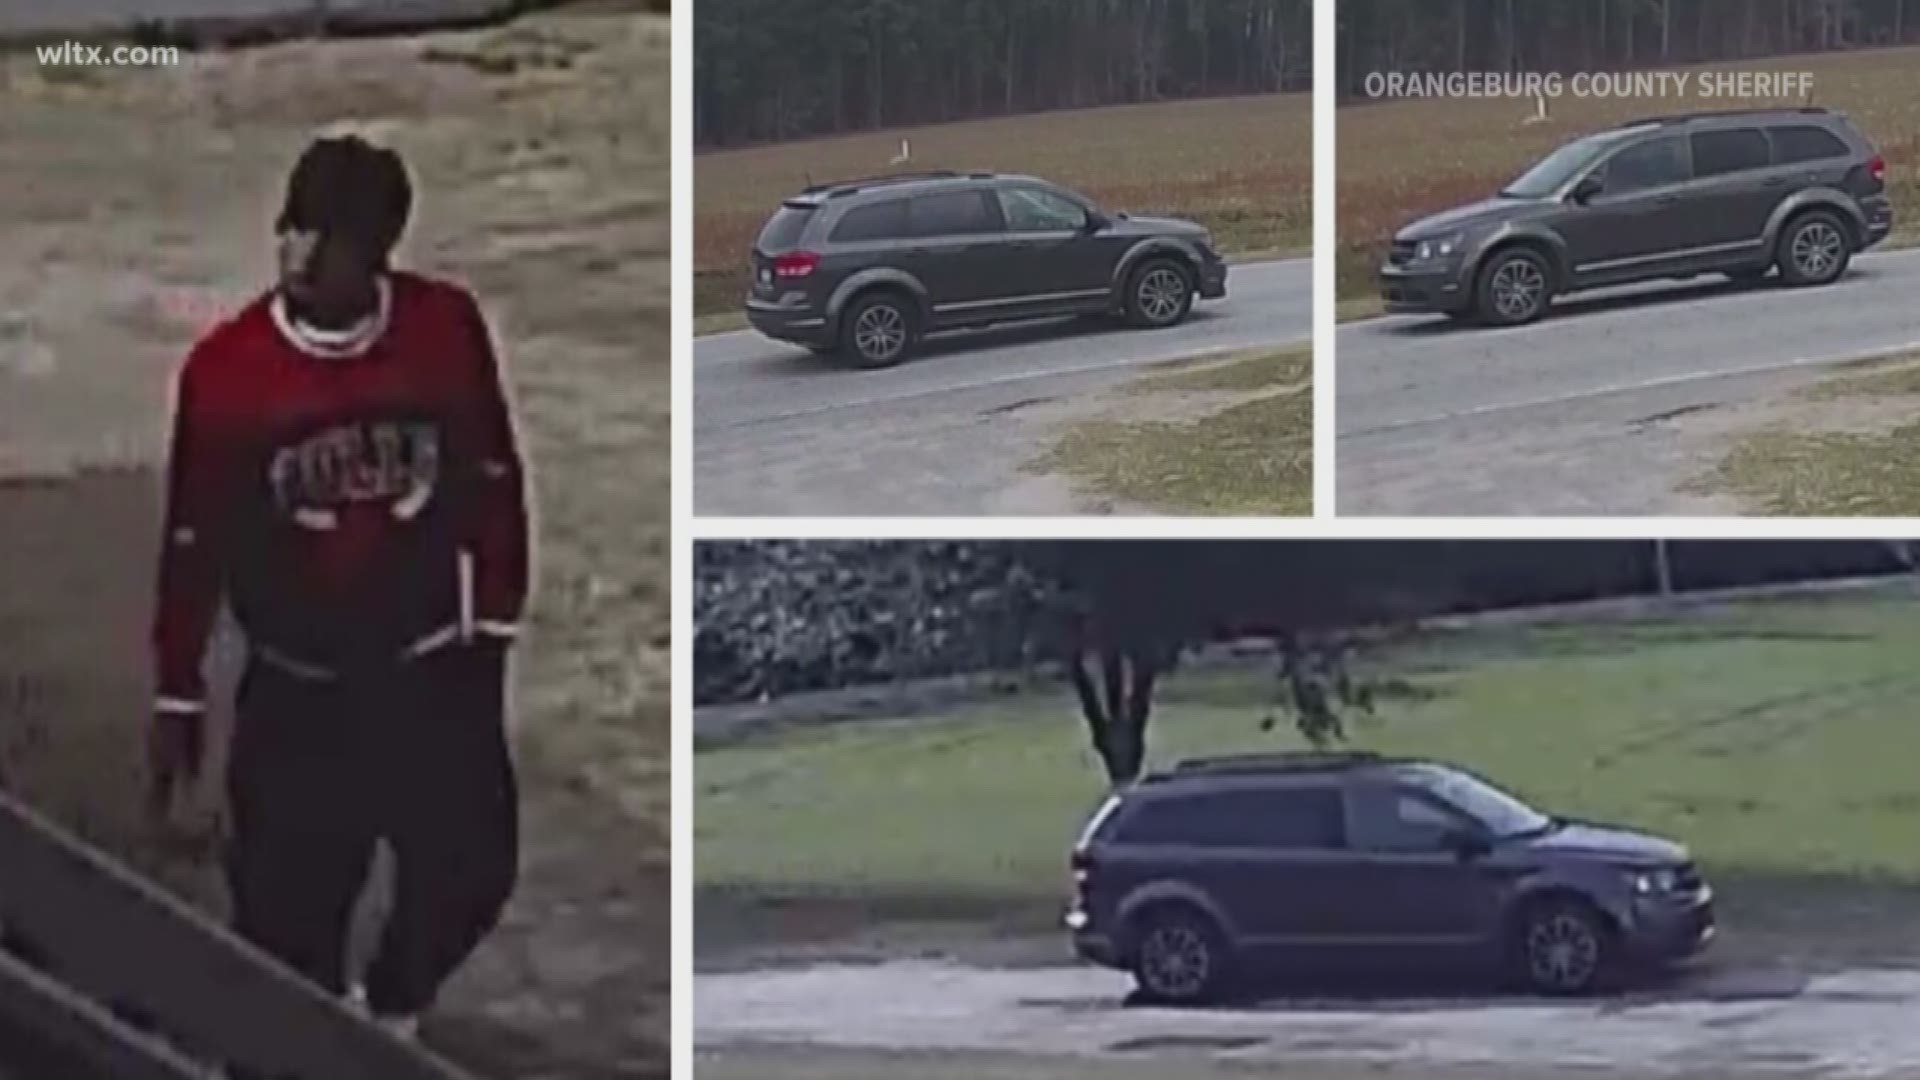 Neighborhood security cameras captured photos of a person of interest